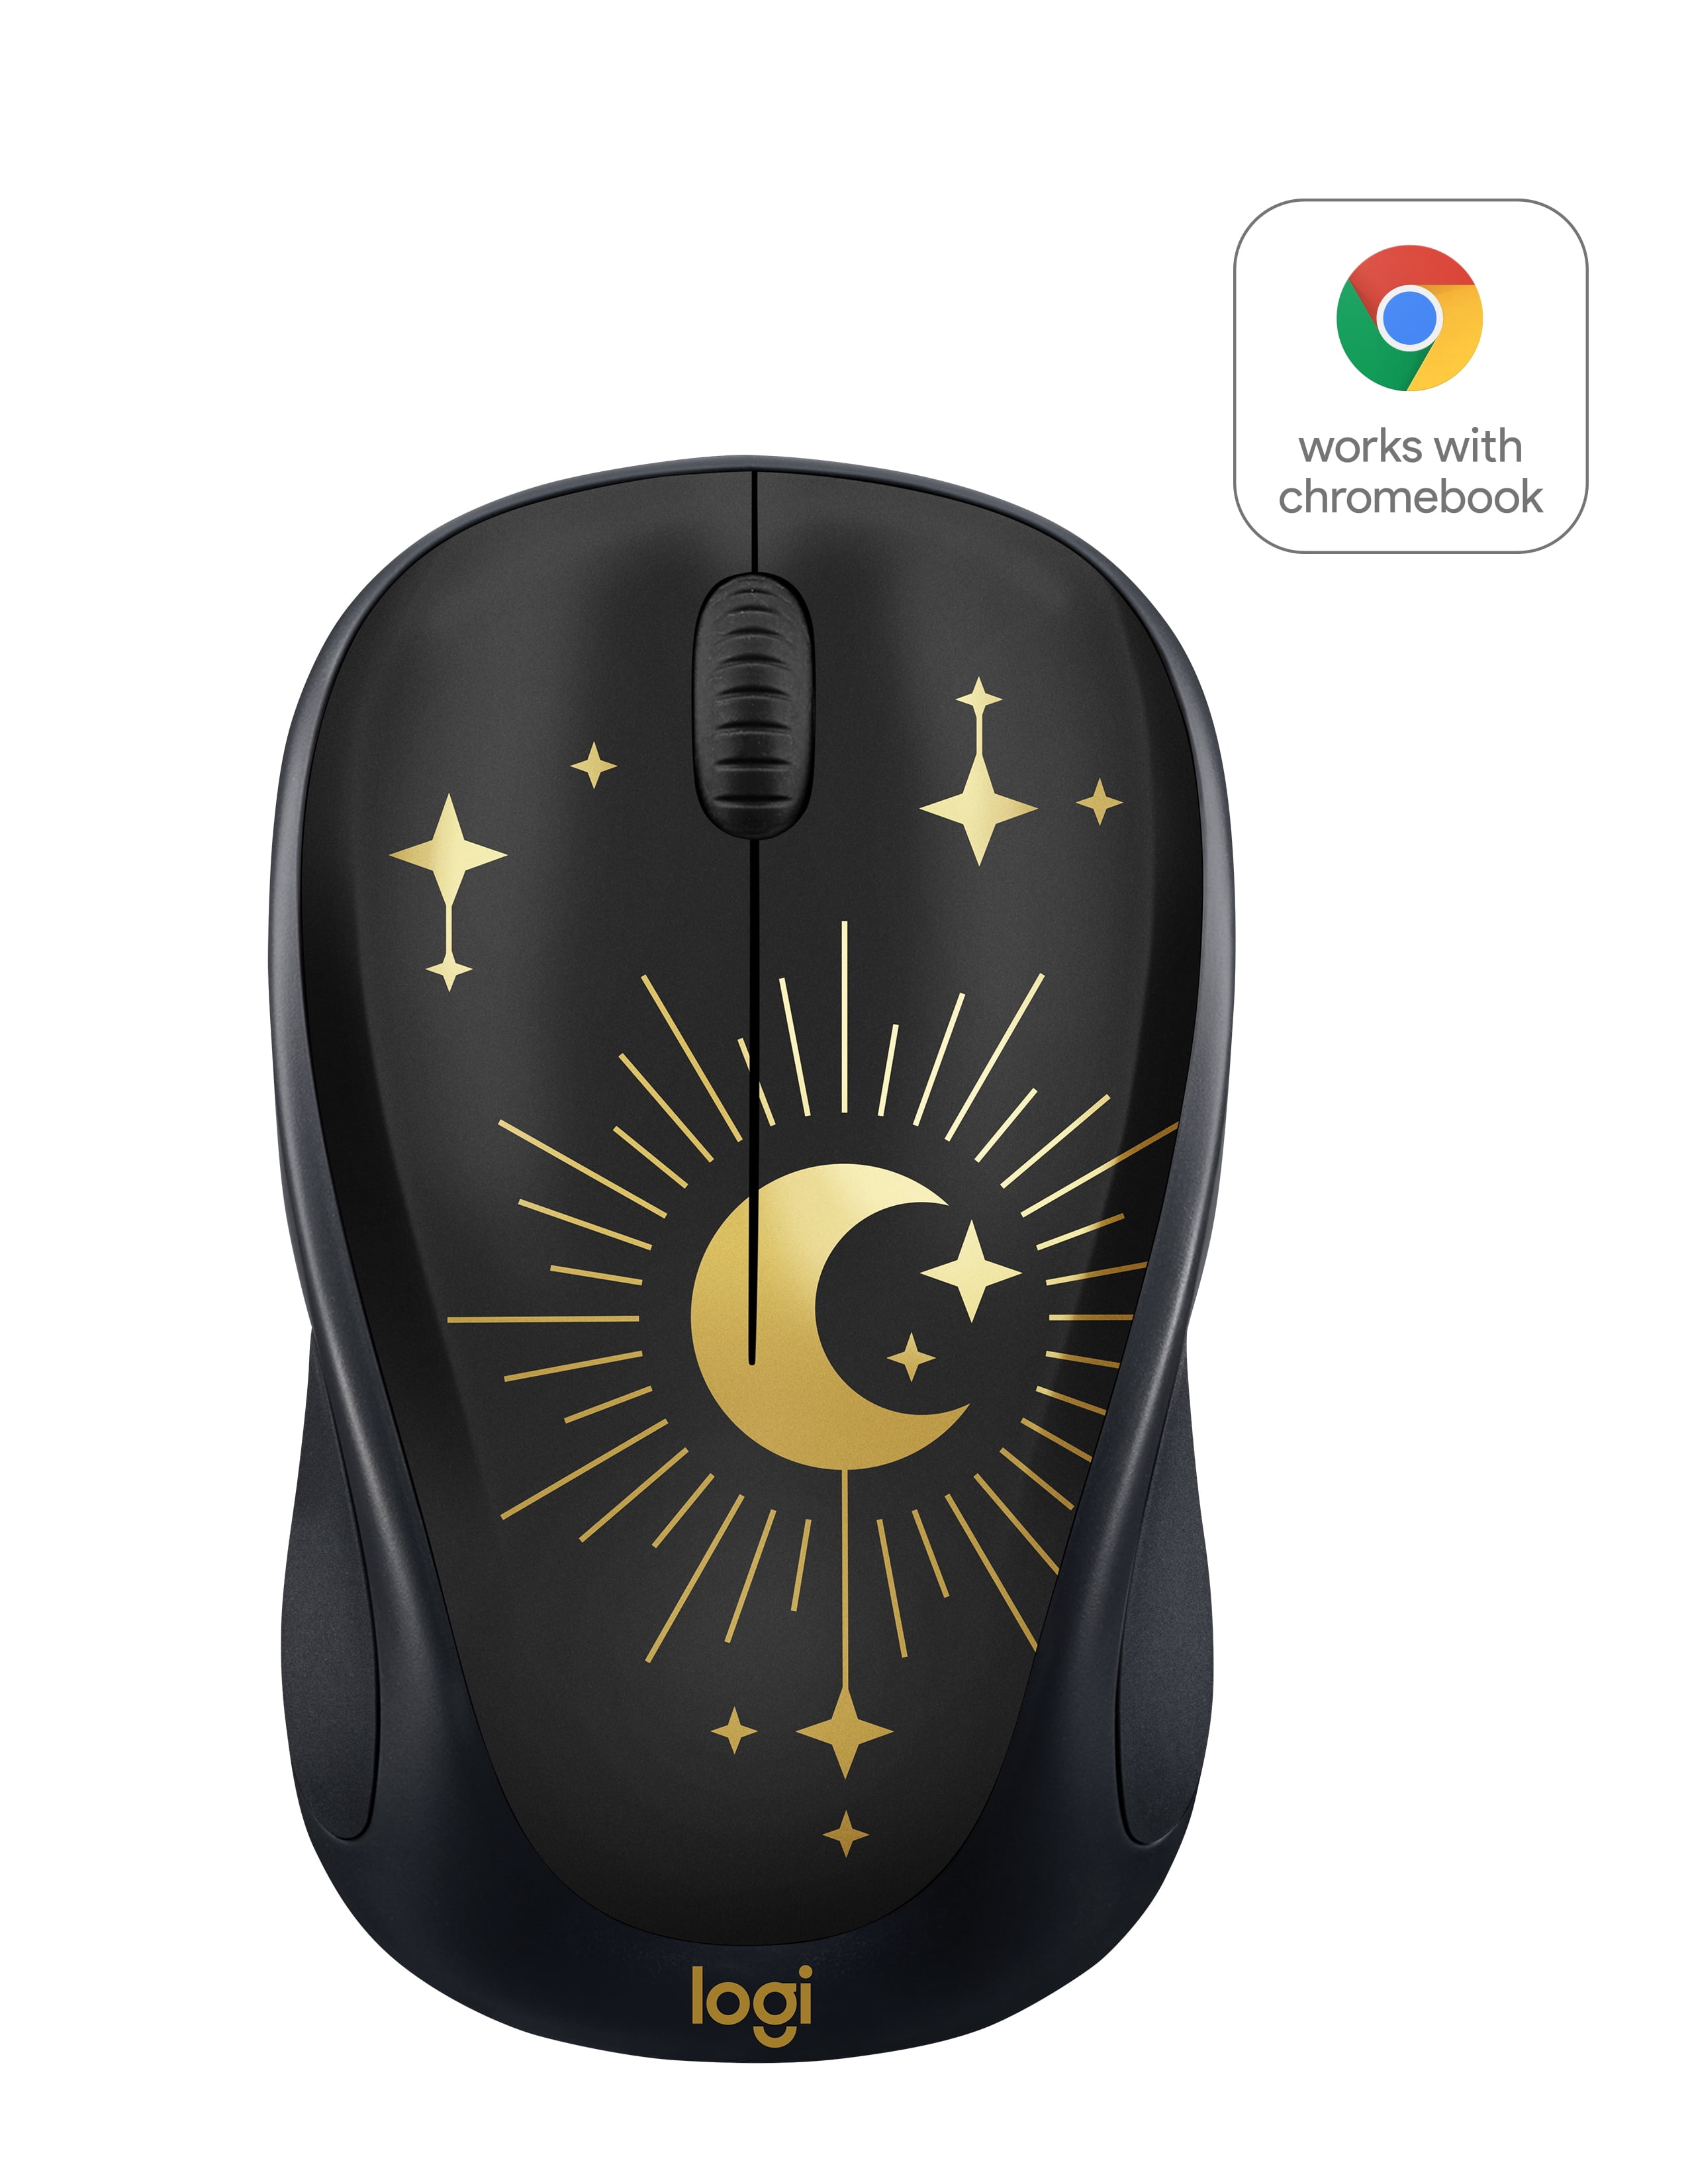 How to Connect Logitech Wireless Mouse to Unifying Receiver